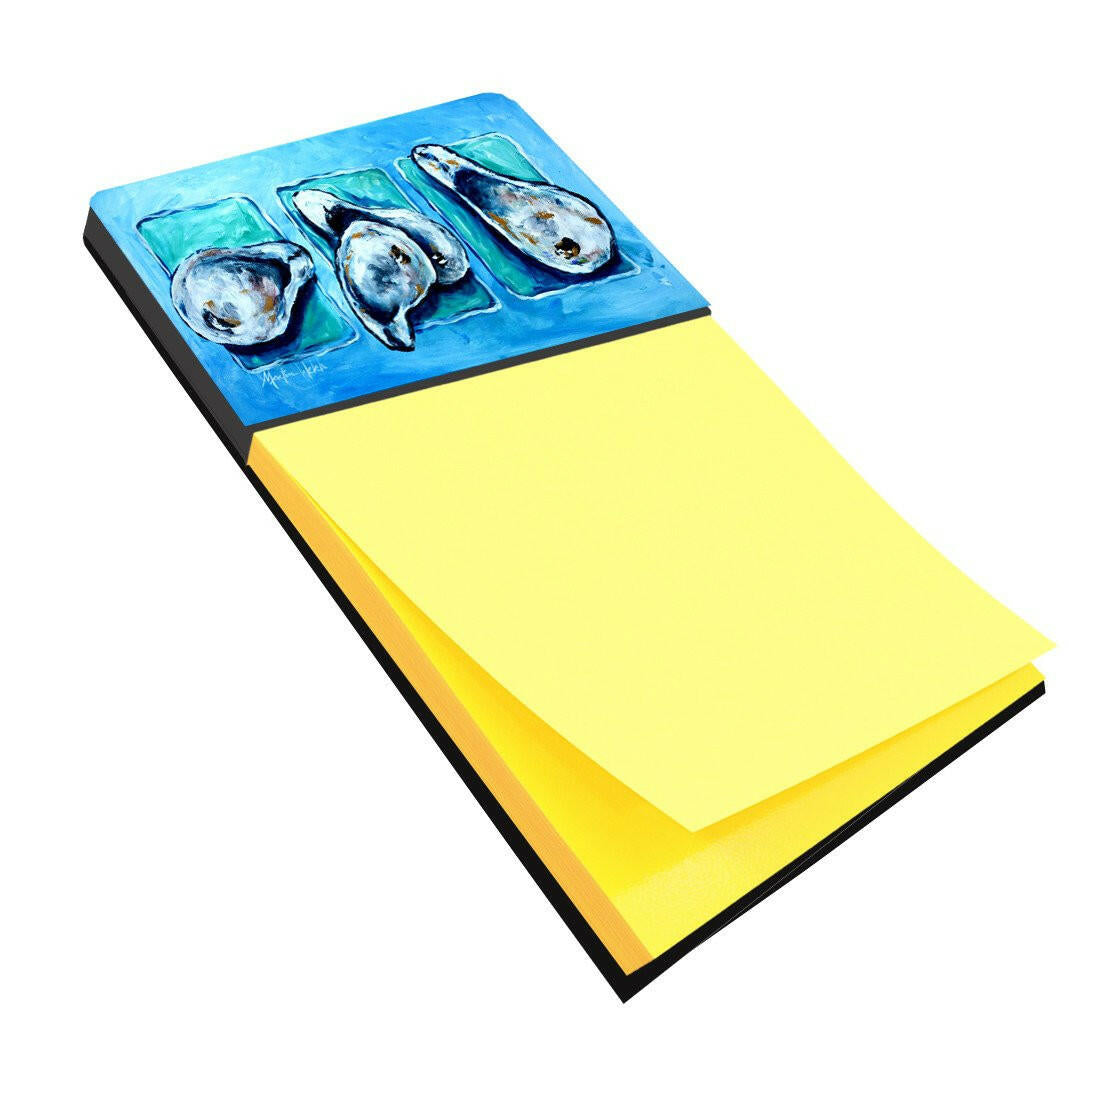 Oysters Oyster + Oyster = Oysters Refiillable Sticky Note Holder or Postit Note Dispenser MW1110SN by Caroline's Treasures